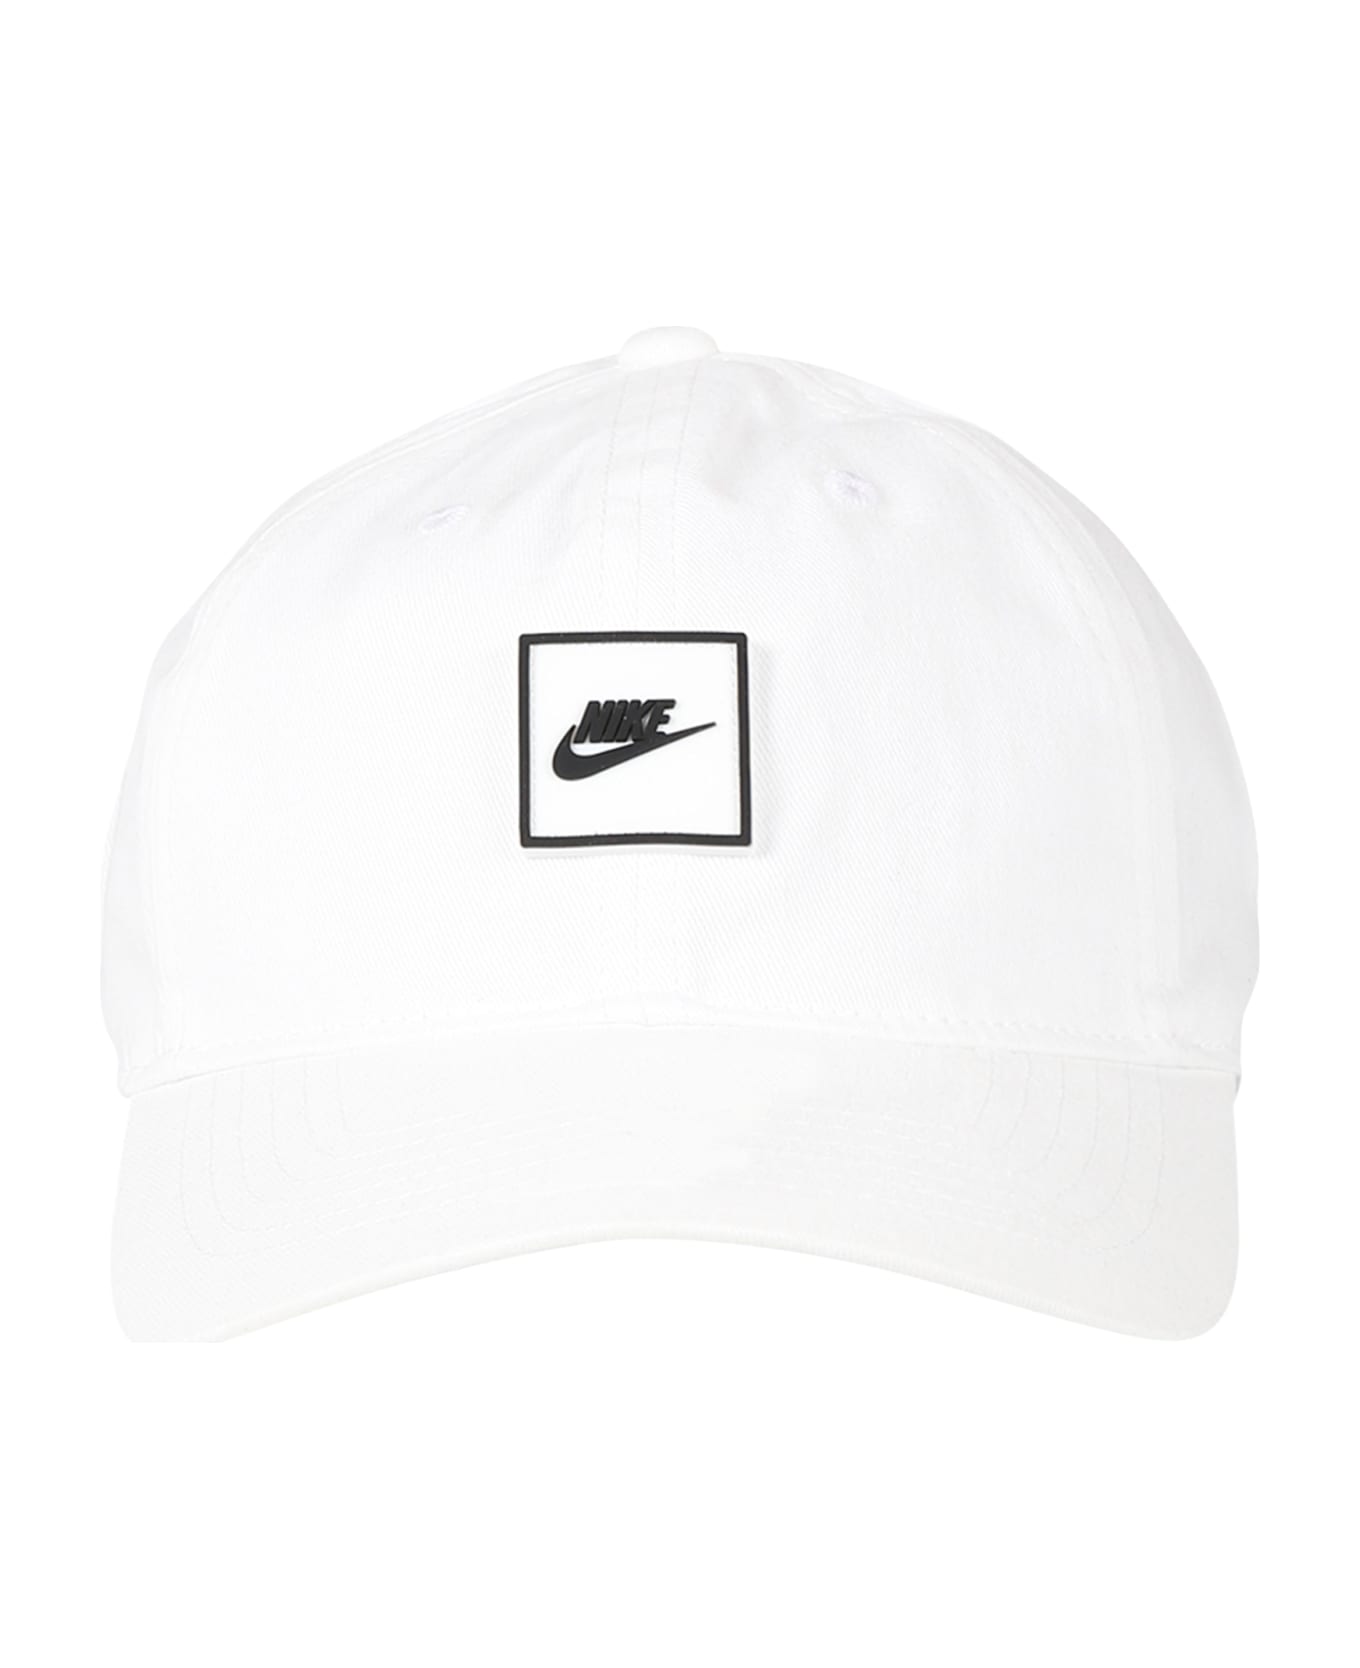 Nike White Hat For Kids With Logo - White アクセサリー＆ギフト